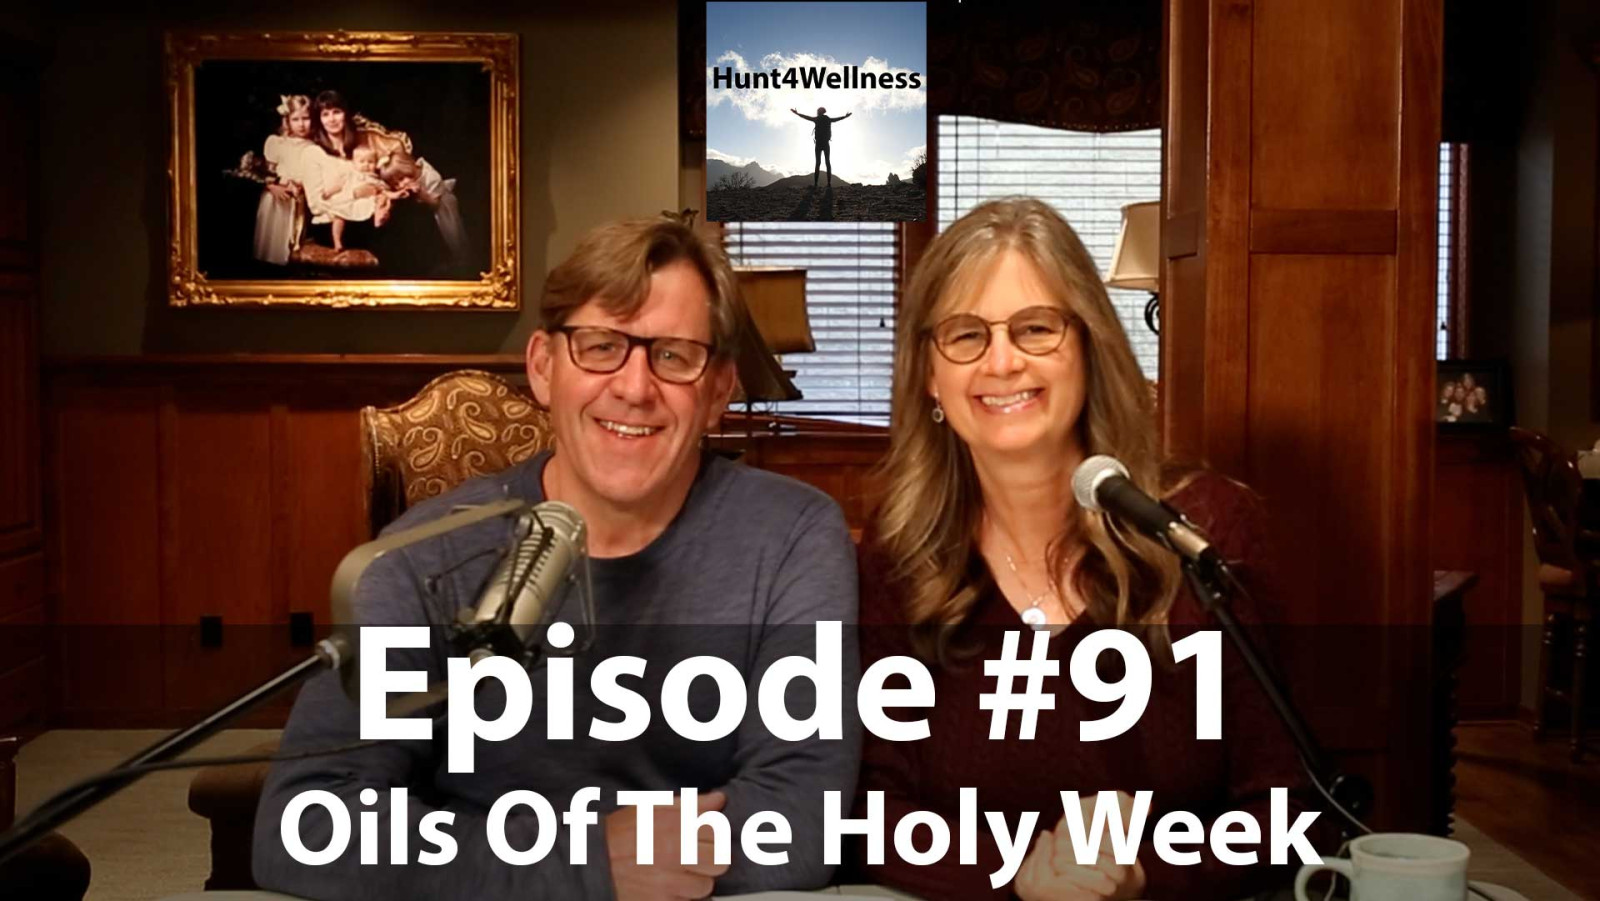 Episode #91 - Oils Of The Holy Week